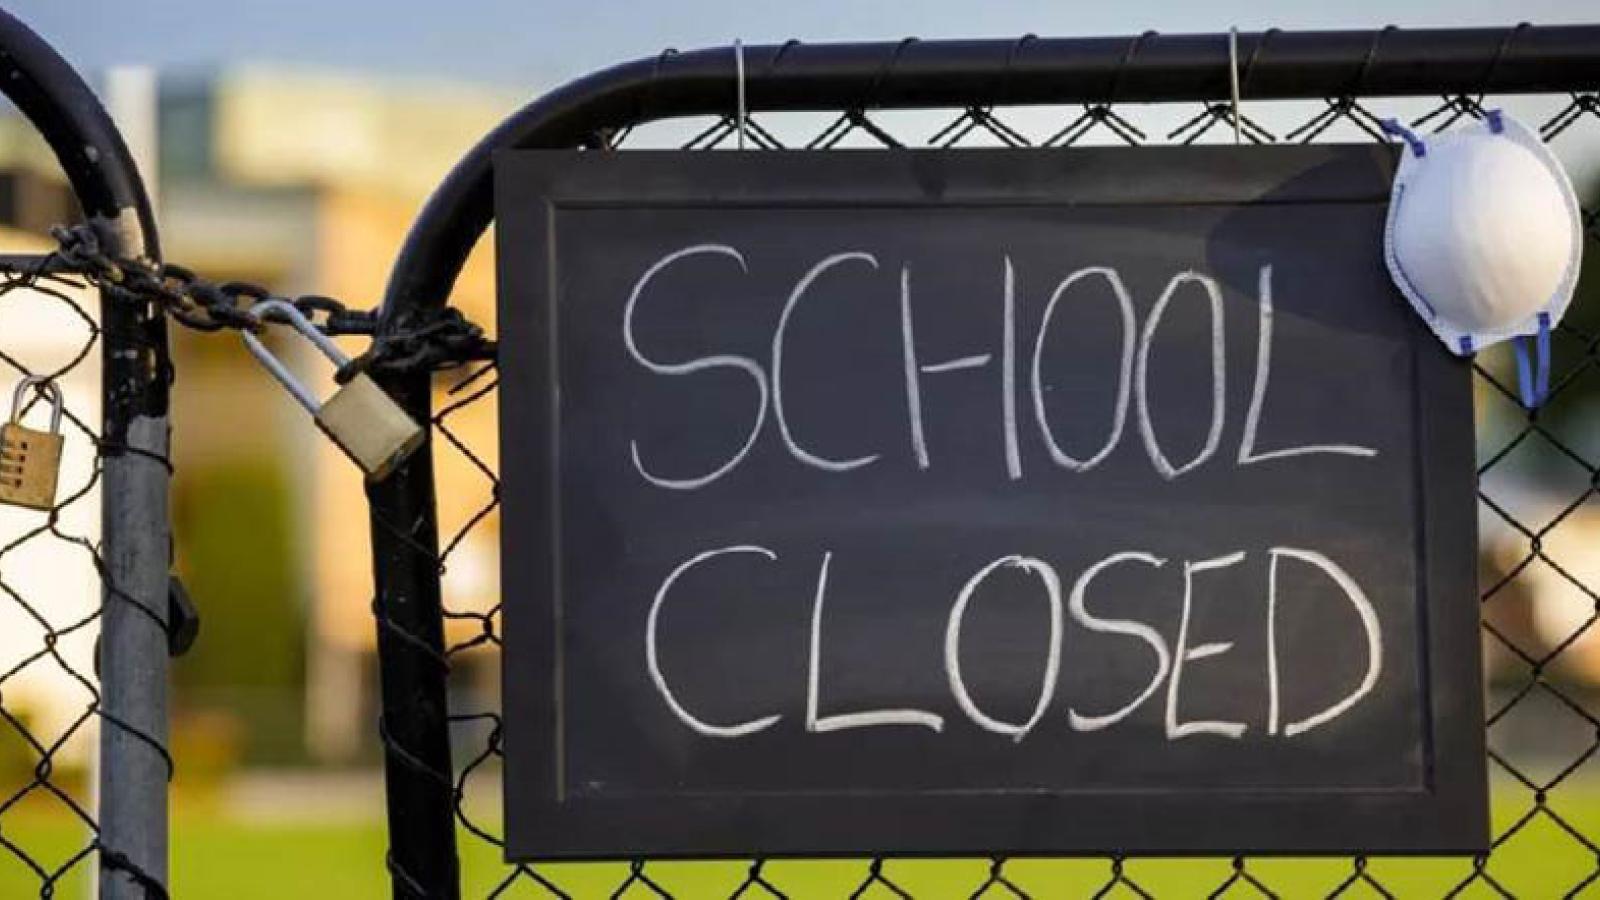 A sign on a locked gate reading "School Closed" with a mask hanging alongside